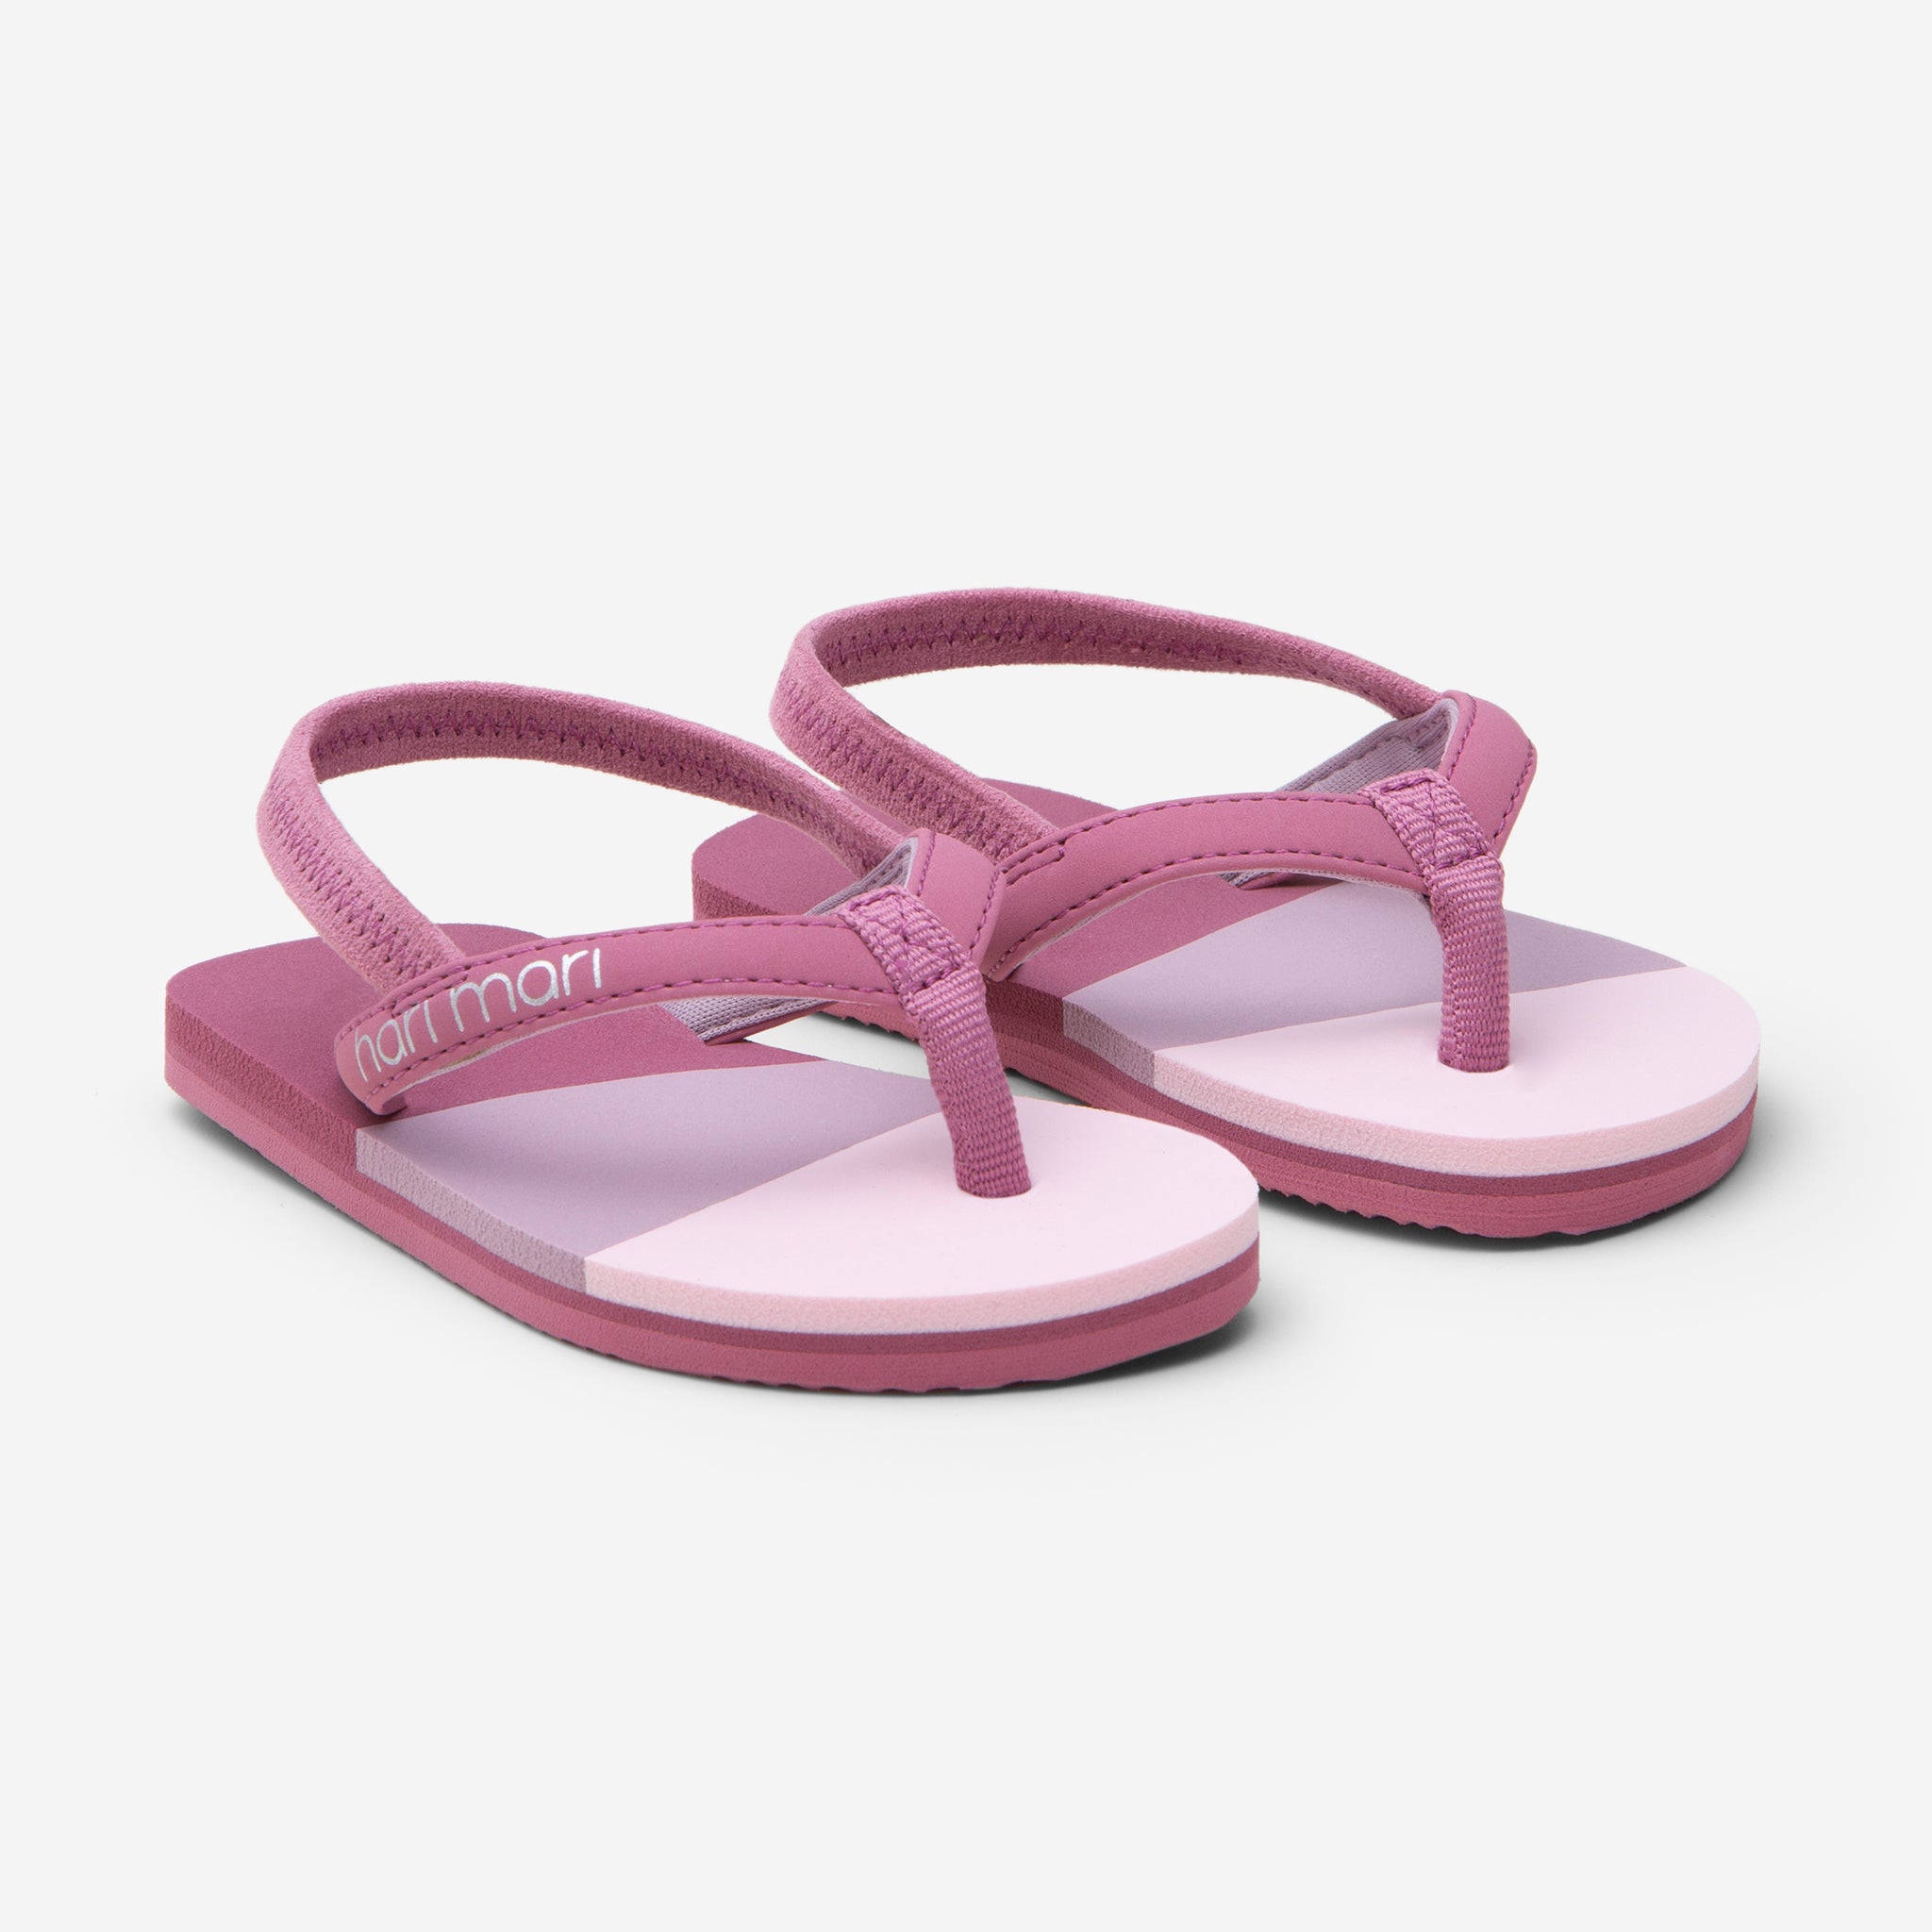 Summer hair and yoga sling sandals! Checkout HauteHomemaking